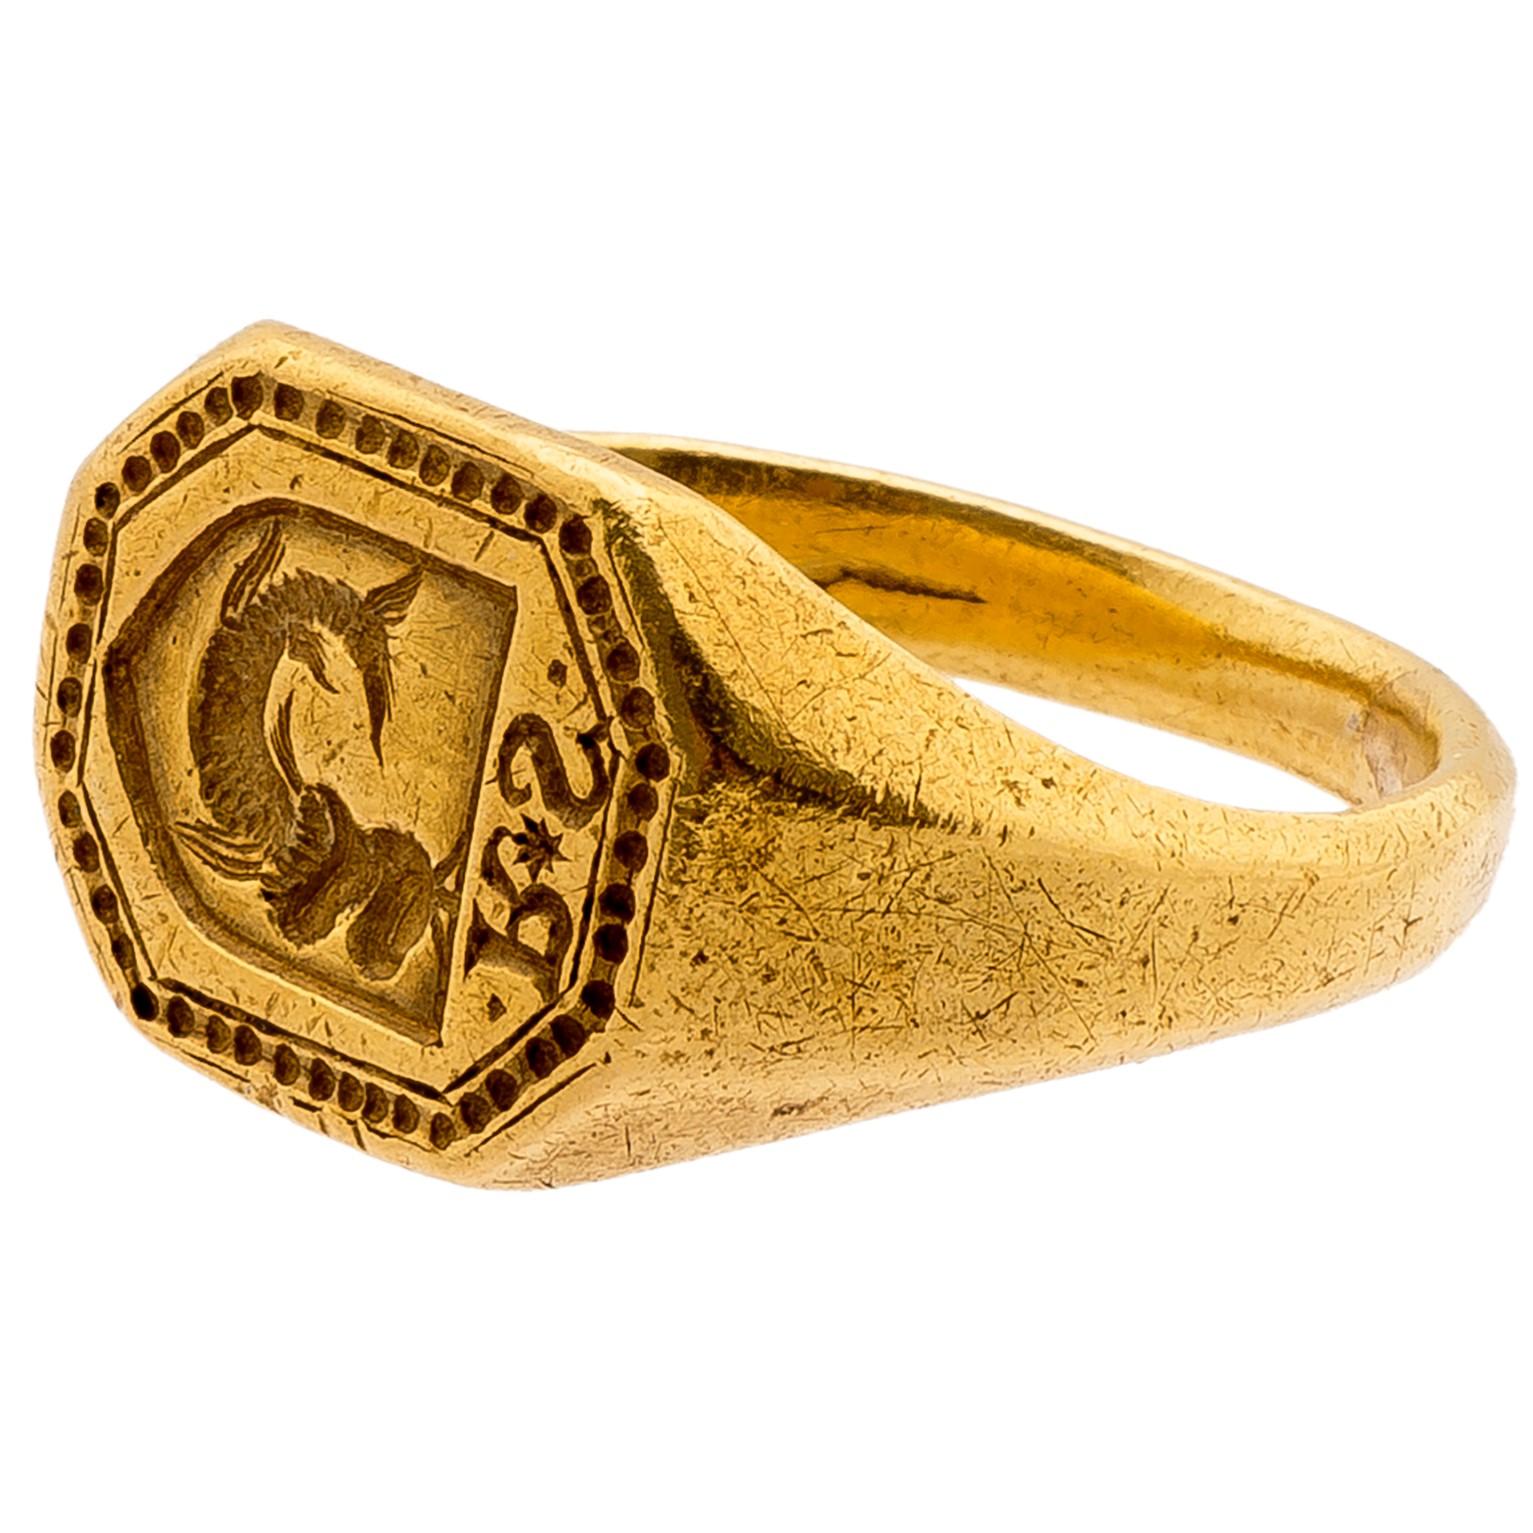 Renaissance Signet Ring with Helmeted Fish and Initials “R*S”
Western Europe, late 15th to early 16th century
Weight 13.3 gr.; bezel 16.2 x 12.9 mm.; circumference 62.86 mm.; US size 10 1/4; UK size U

The octagonal bezel with engraved line and